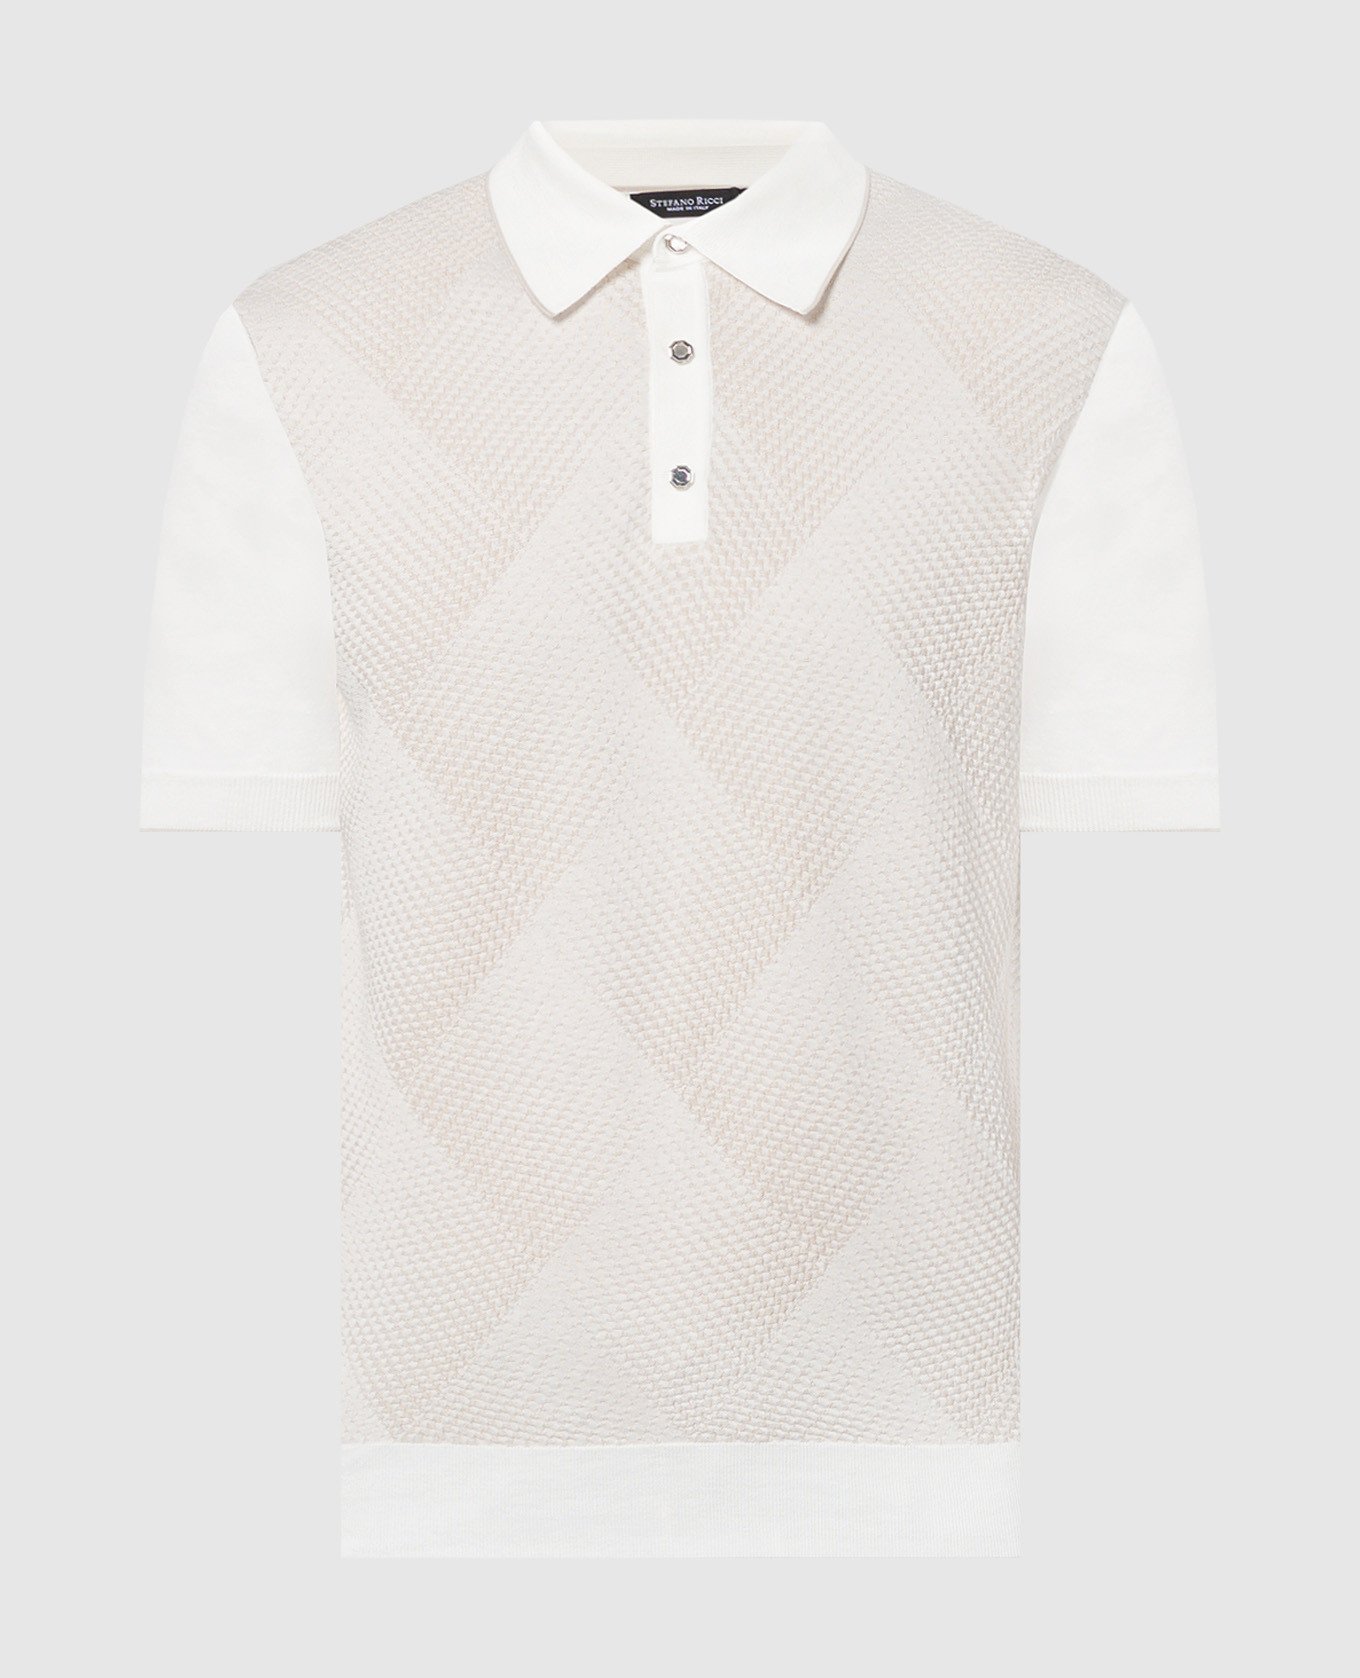 White polo with patterned silk